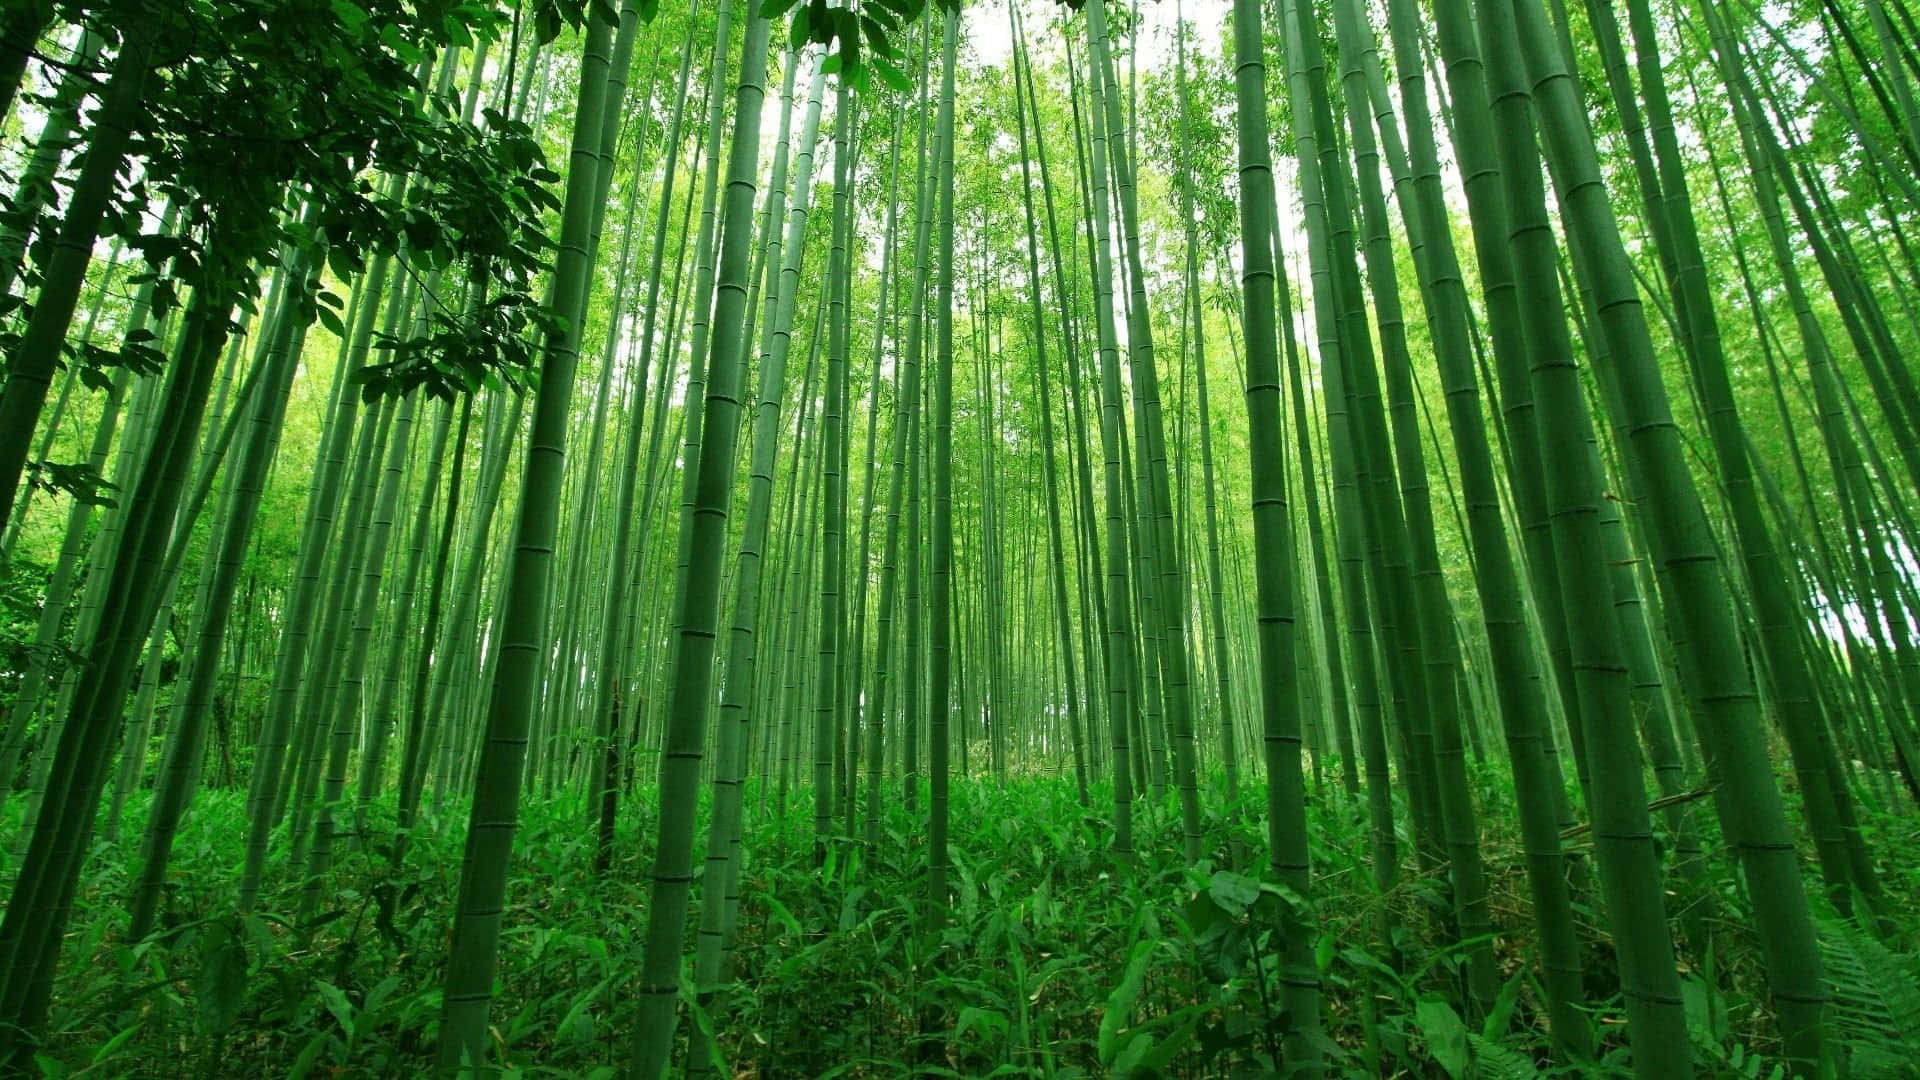 Forest Of Tall And Green Bamboo Desktop Wallpaper